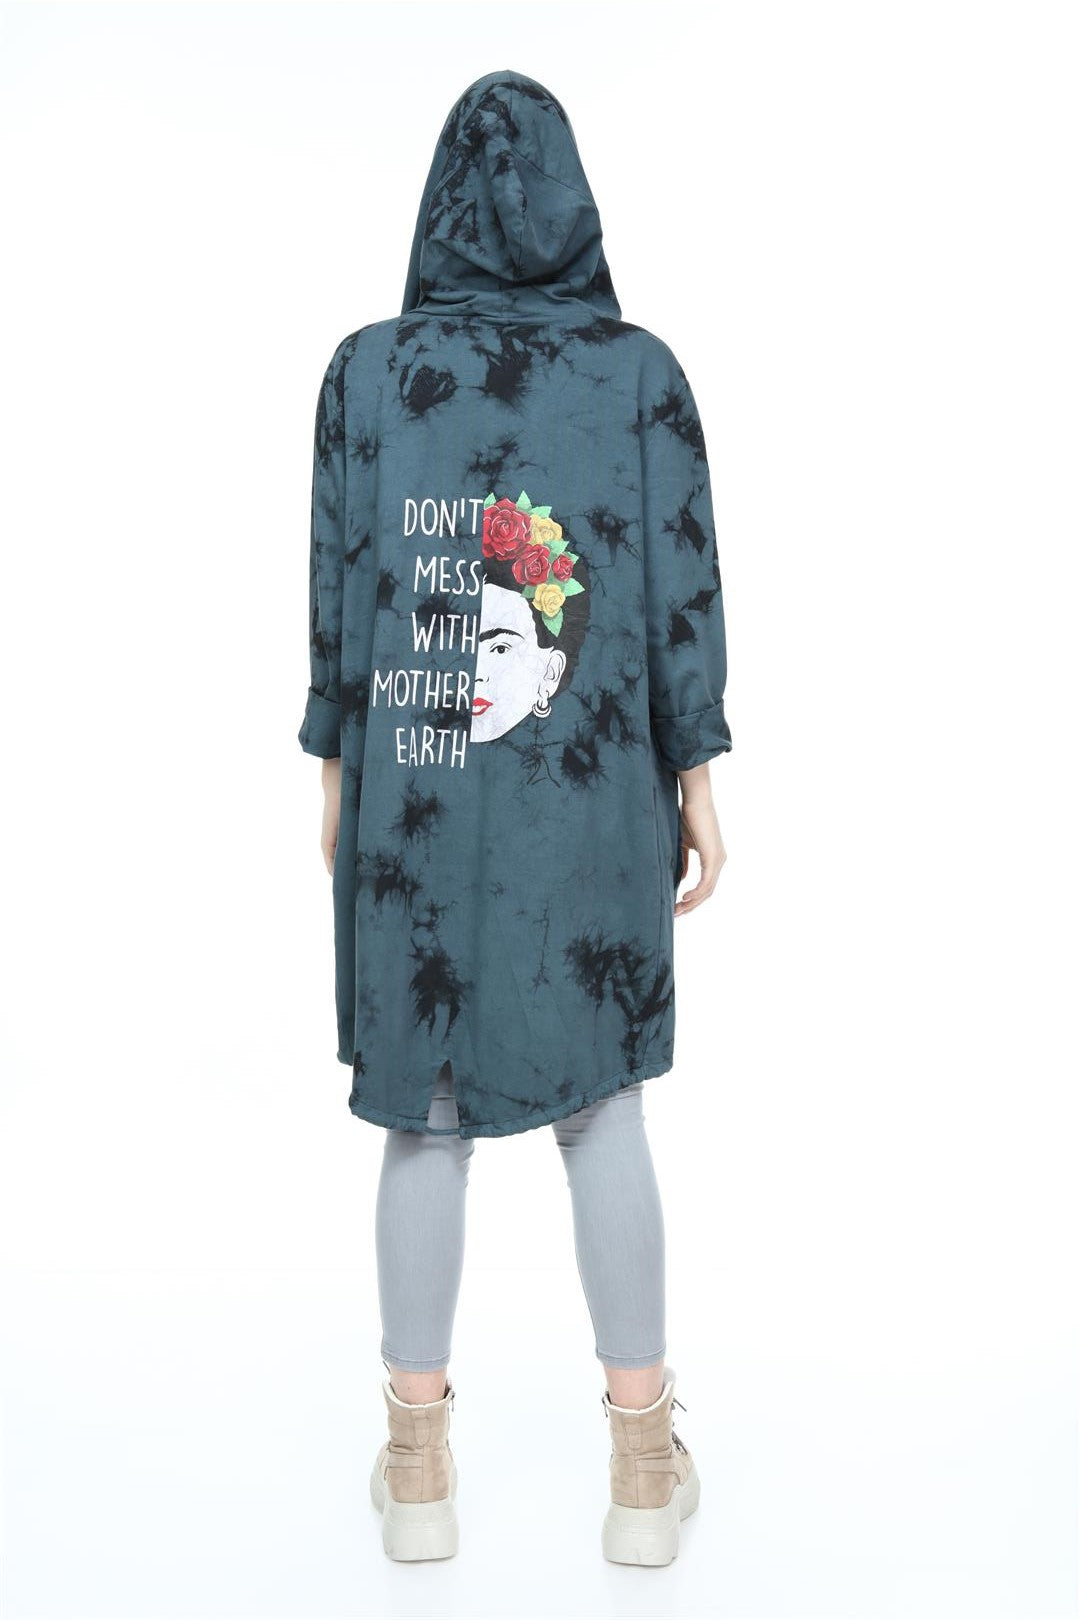 Green Long Tie Die Frida Kahlo Print Cotton Cardigan with Hood